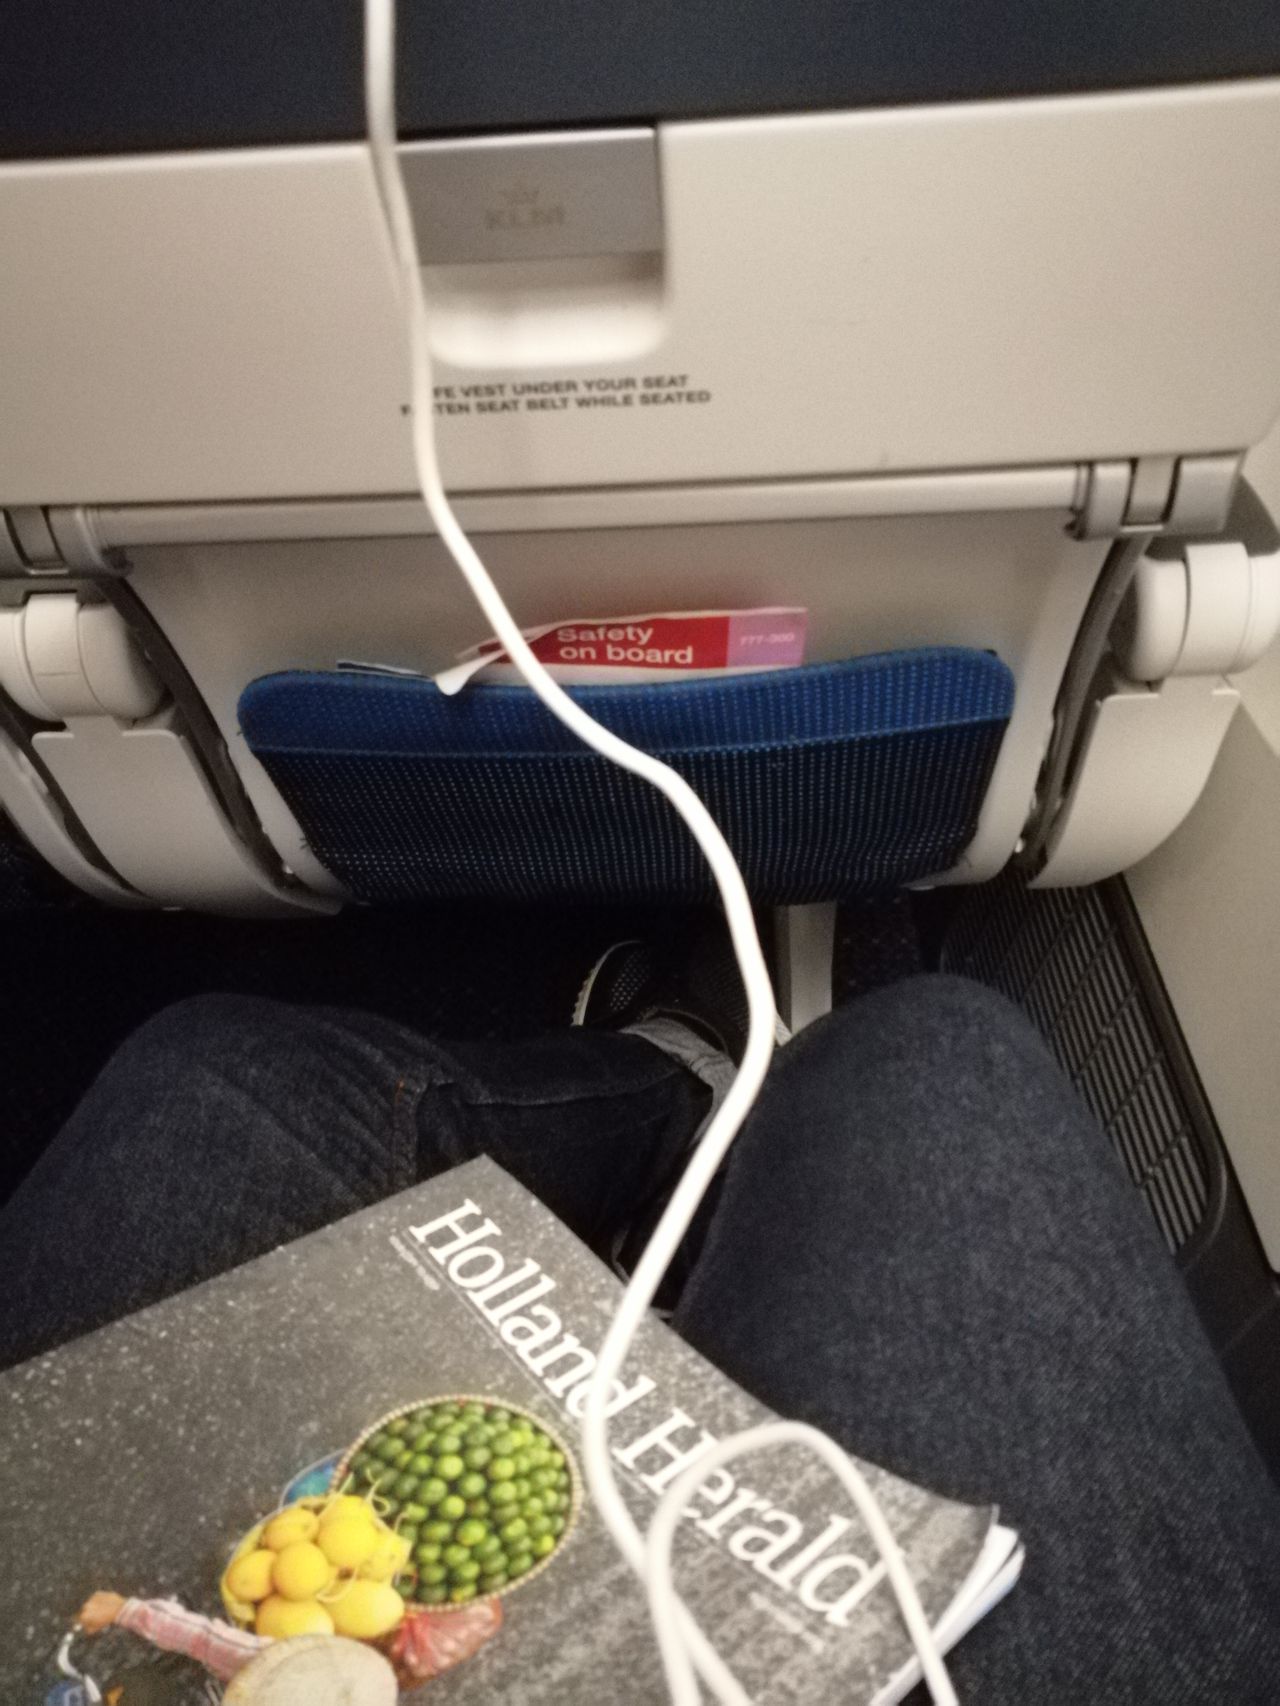 Review Of Turkish Airlines Flight From Kuala Lumpur To Istanbul In Economy